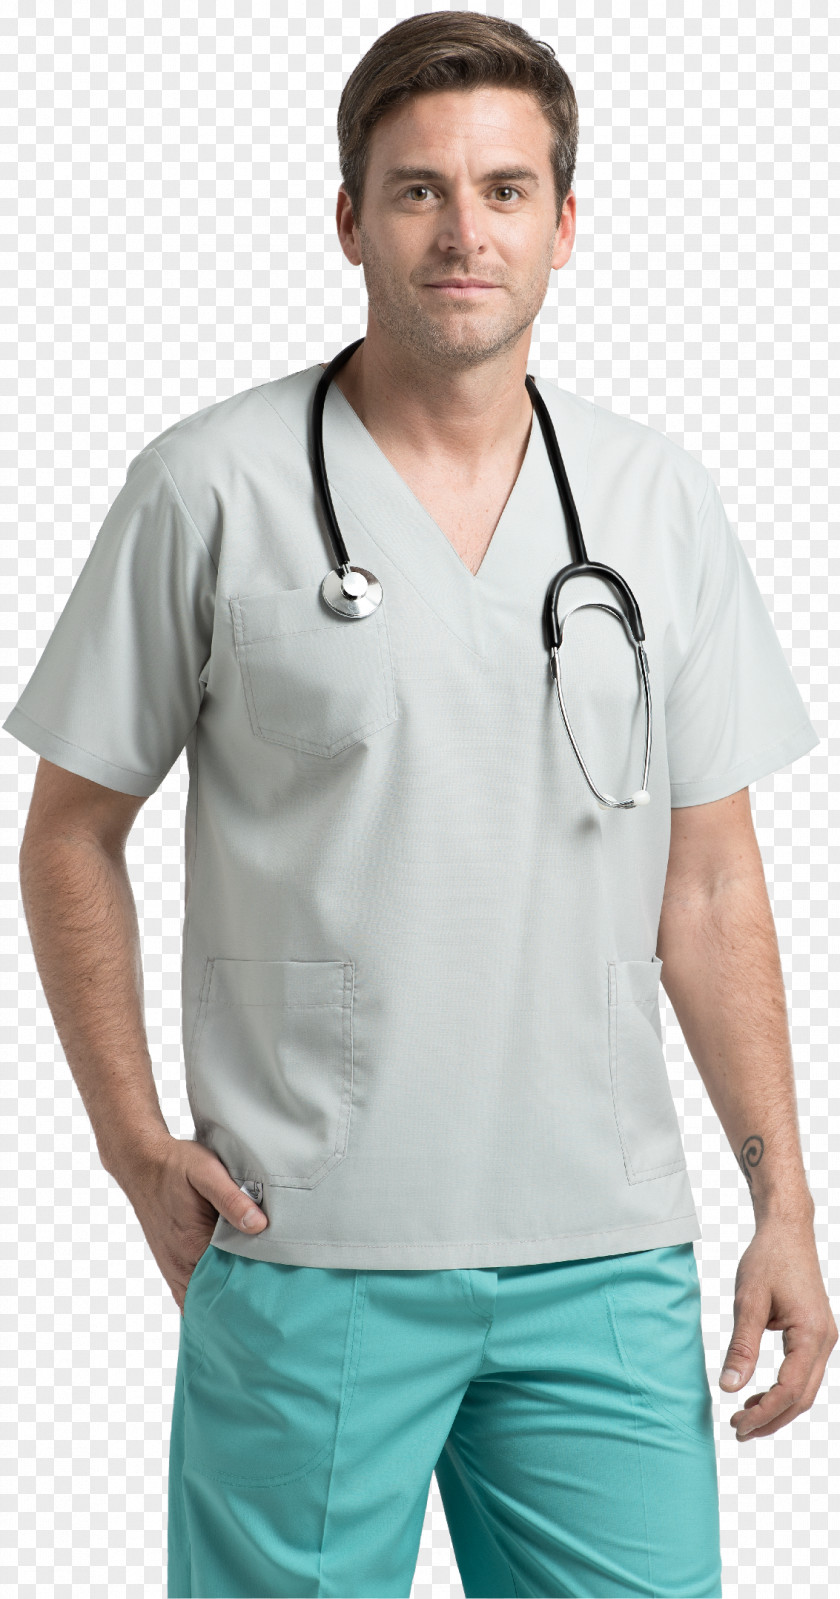 T-shirt Physician Lab Coats Stethoscope Scrubs PNG